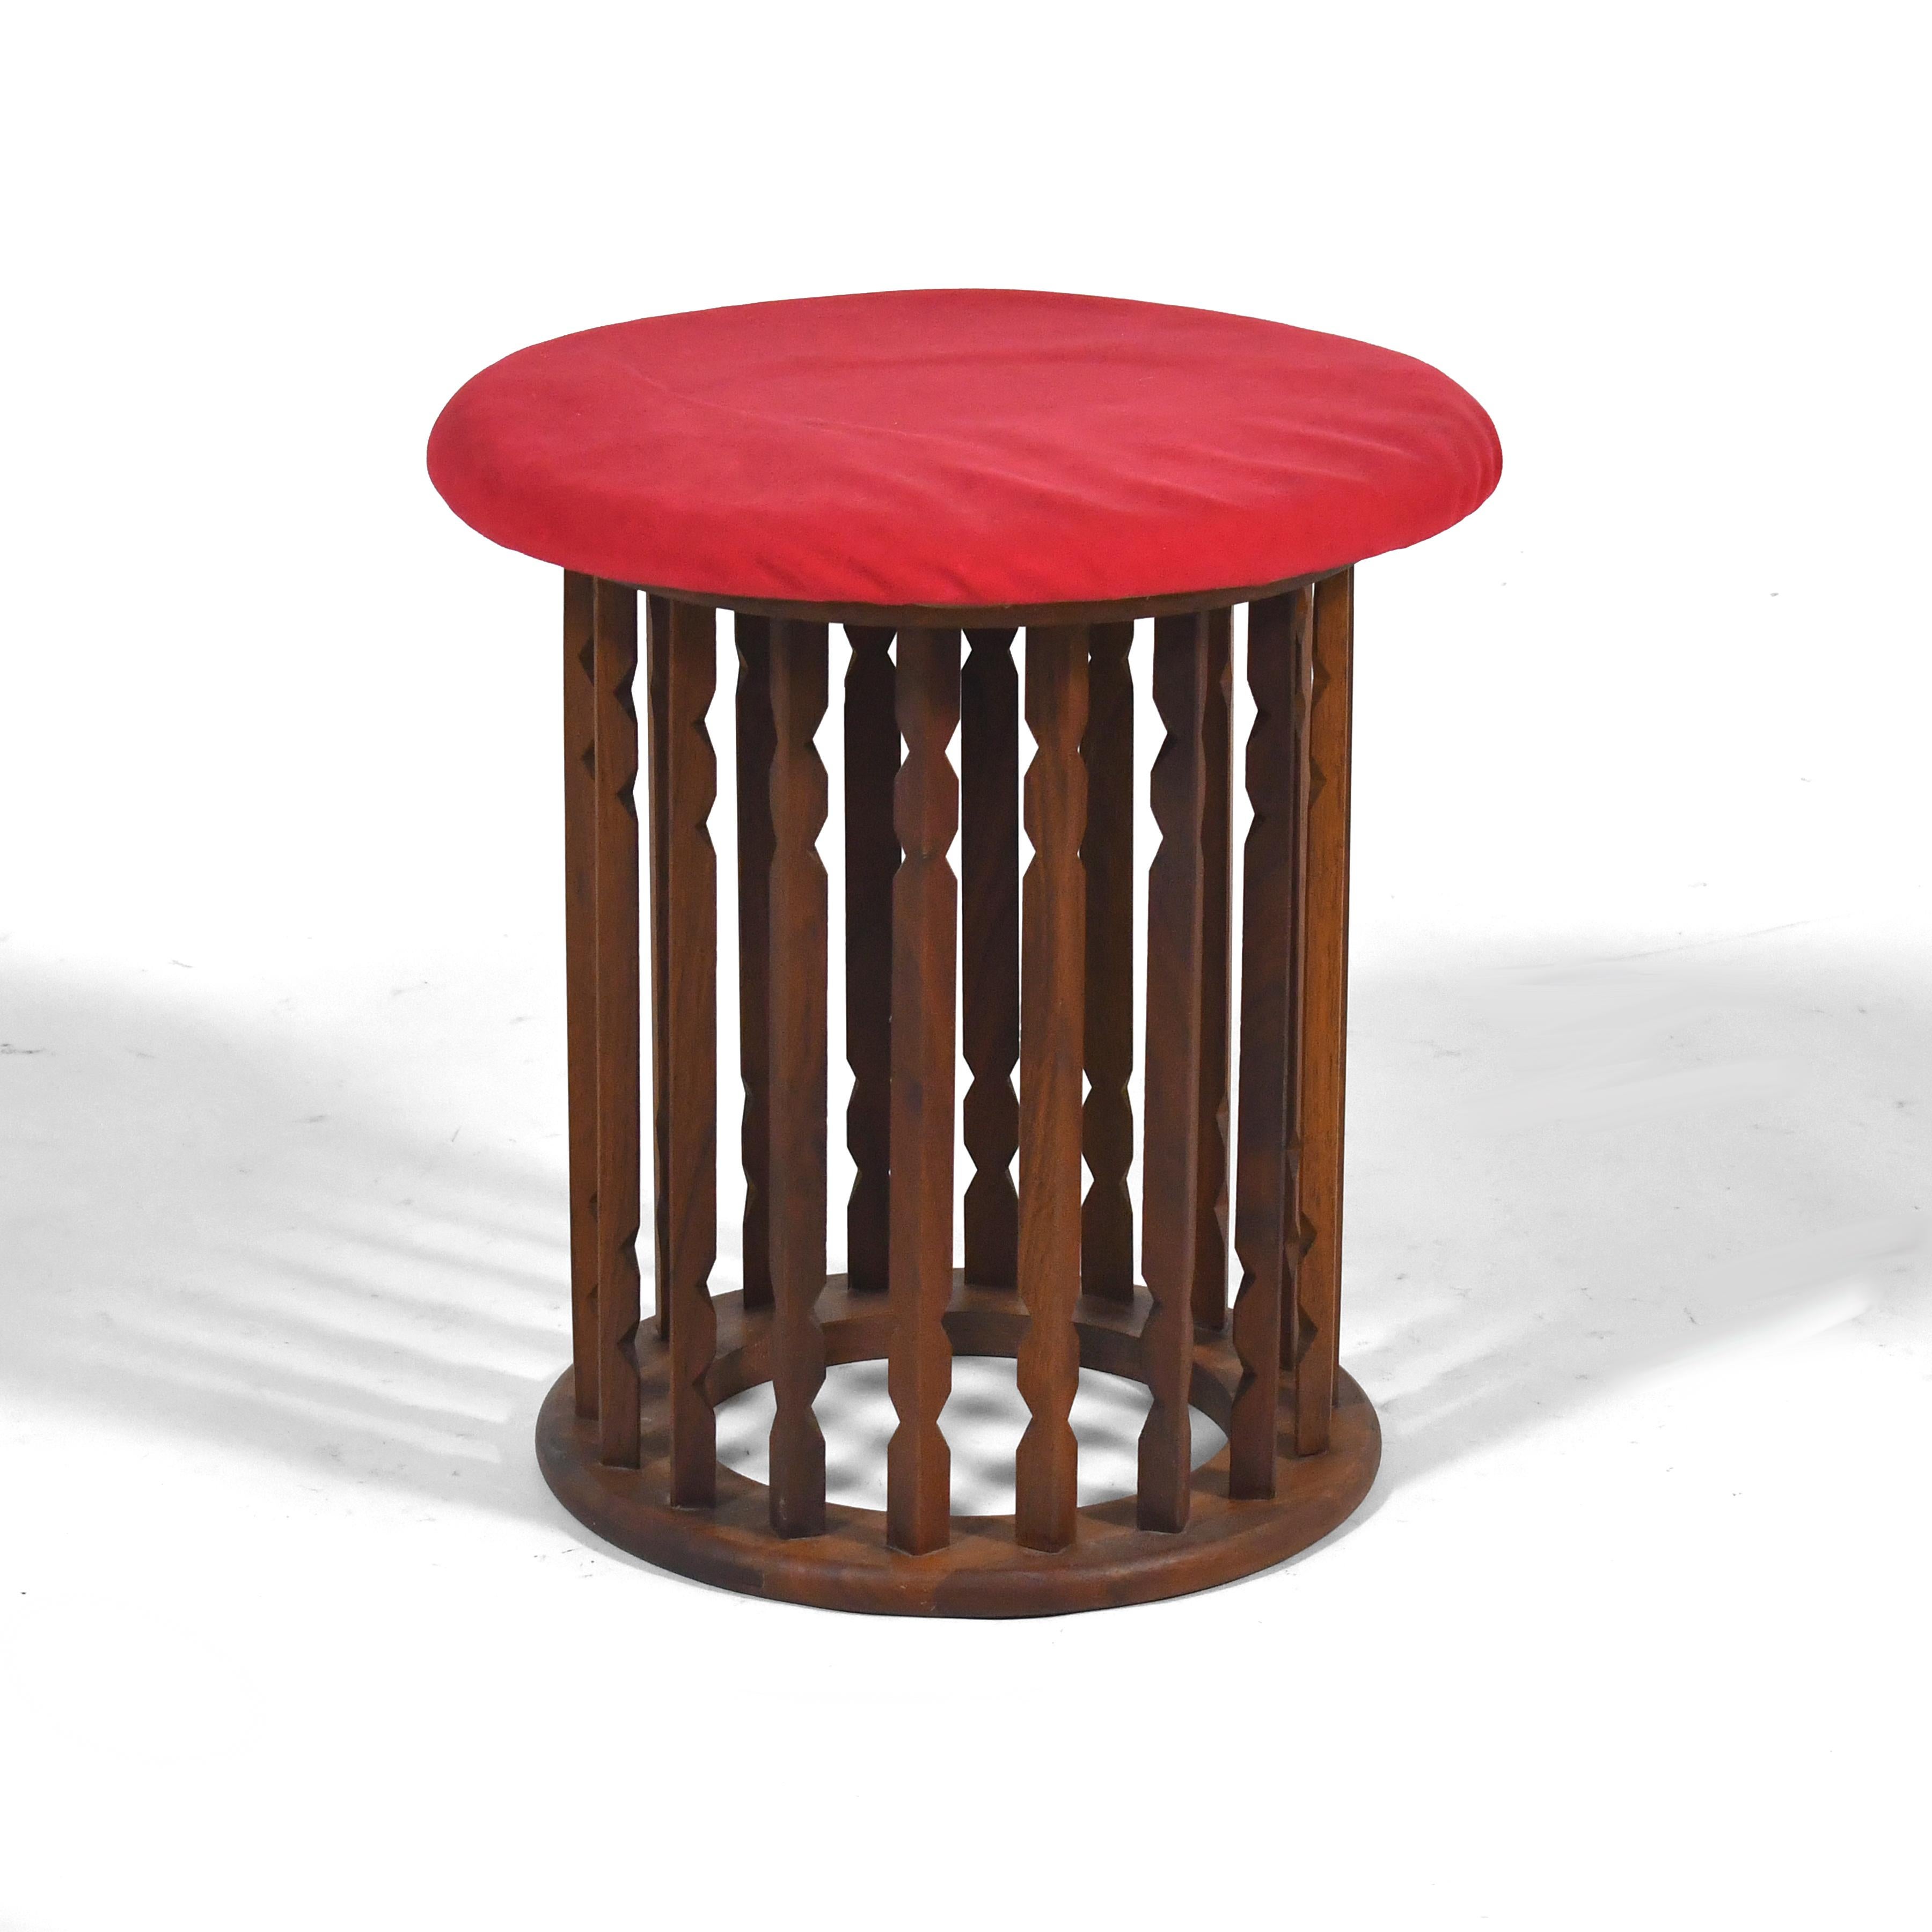 This lovely little stool by Arthur Umanoff for Washington Woodcraft has sculptural spindles that create visual movement as your perspective on the stool changes.

Measures: 17